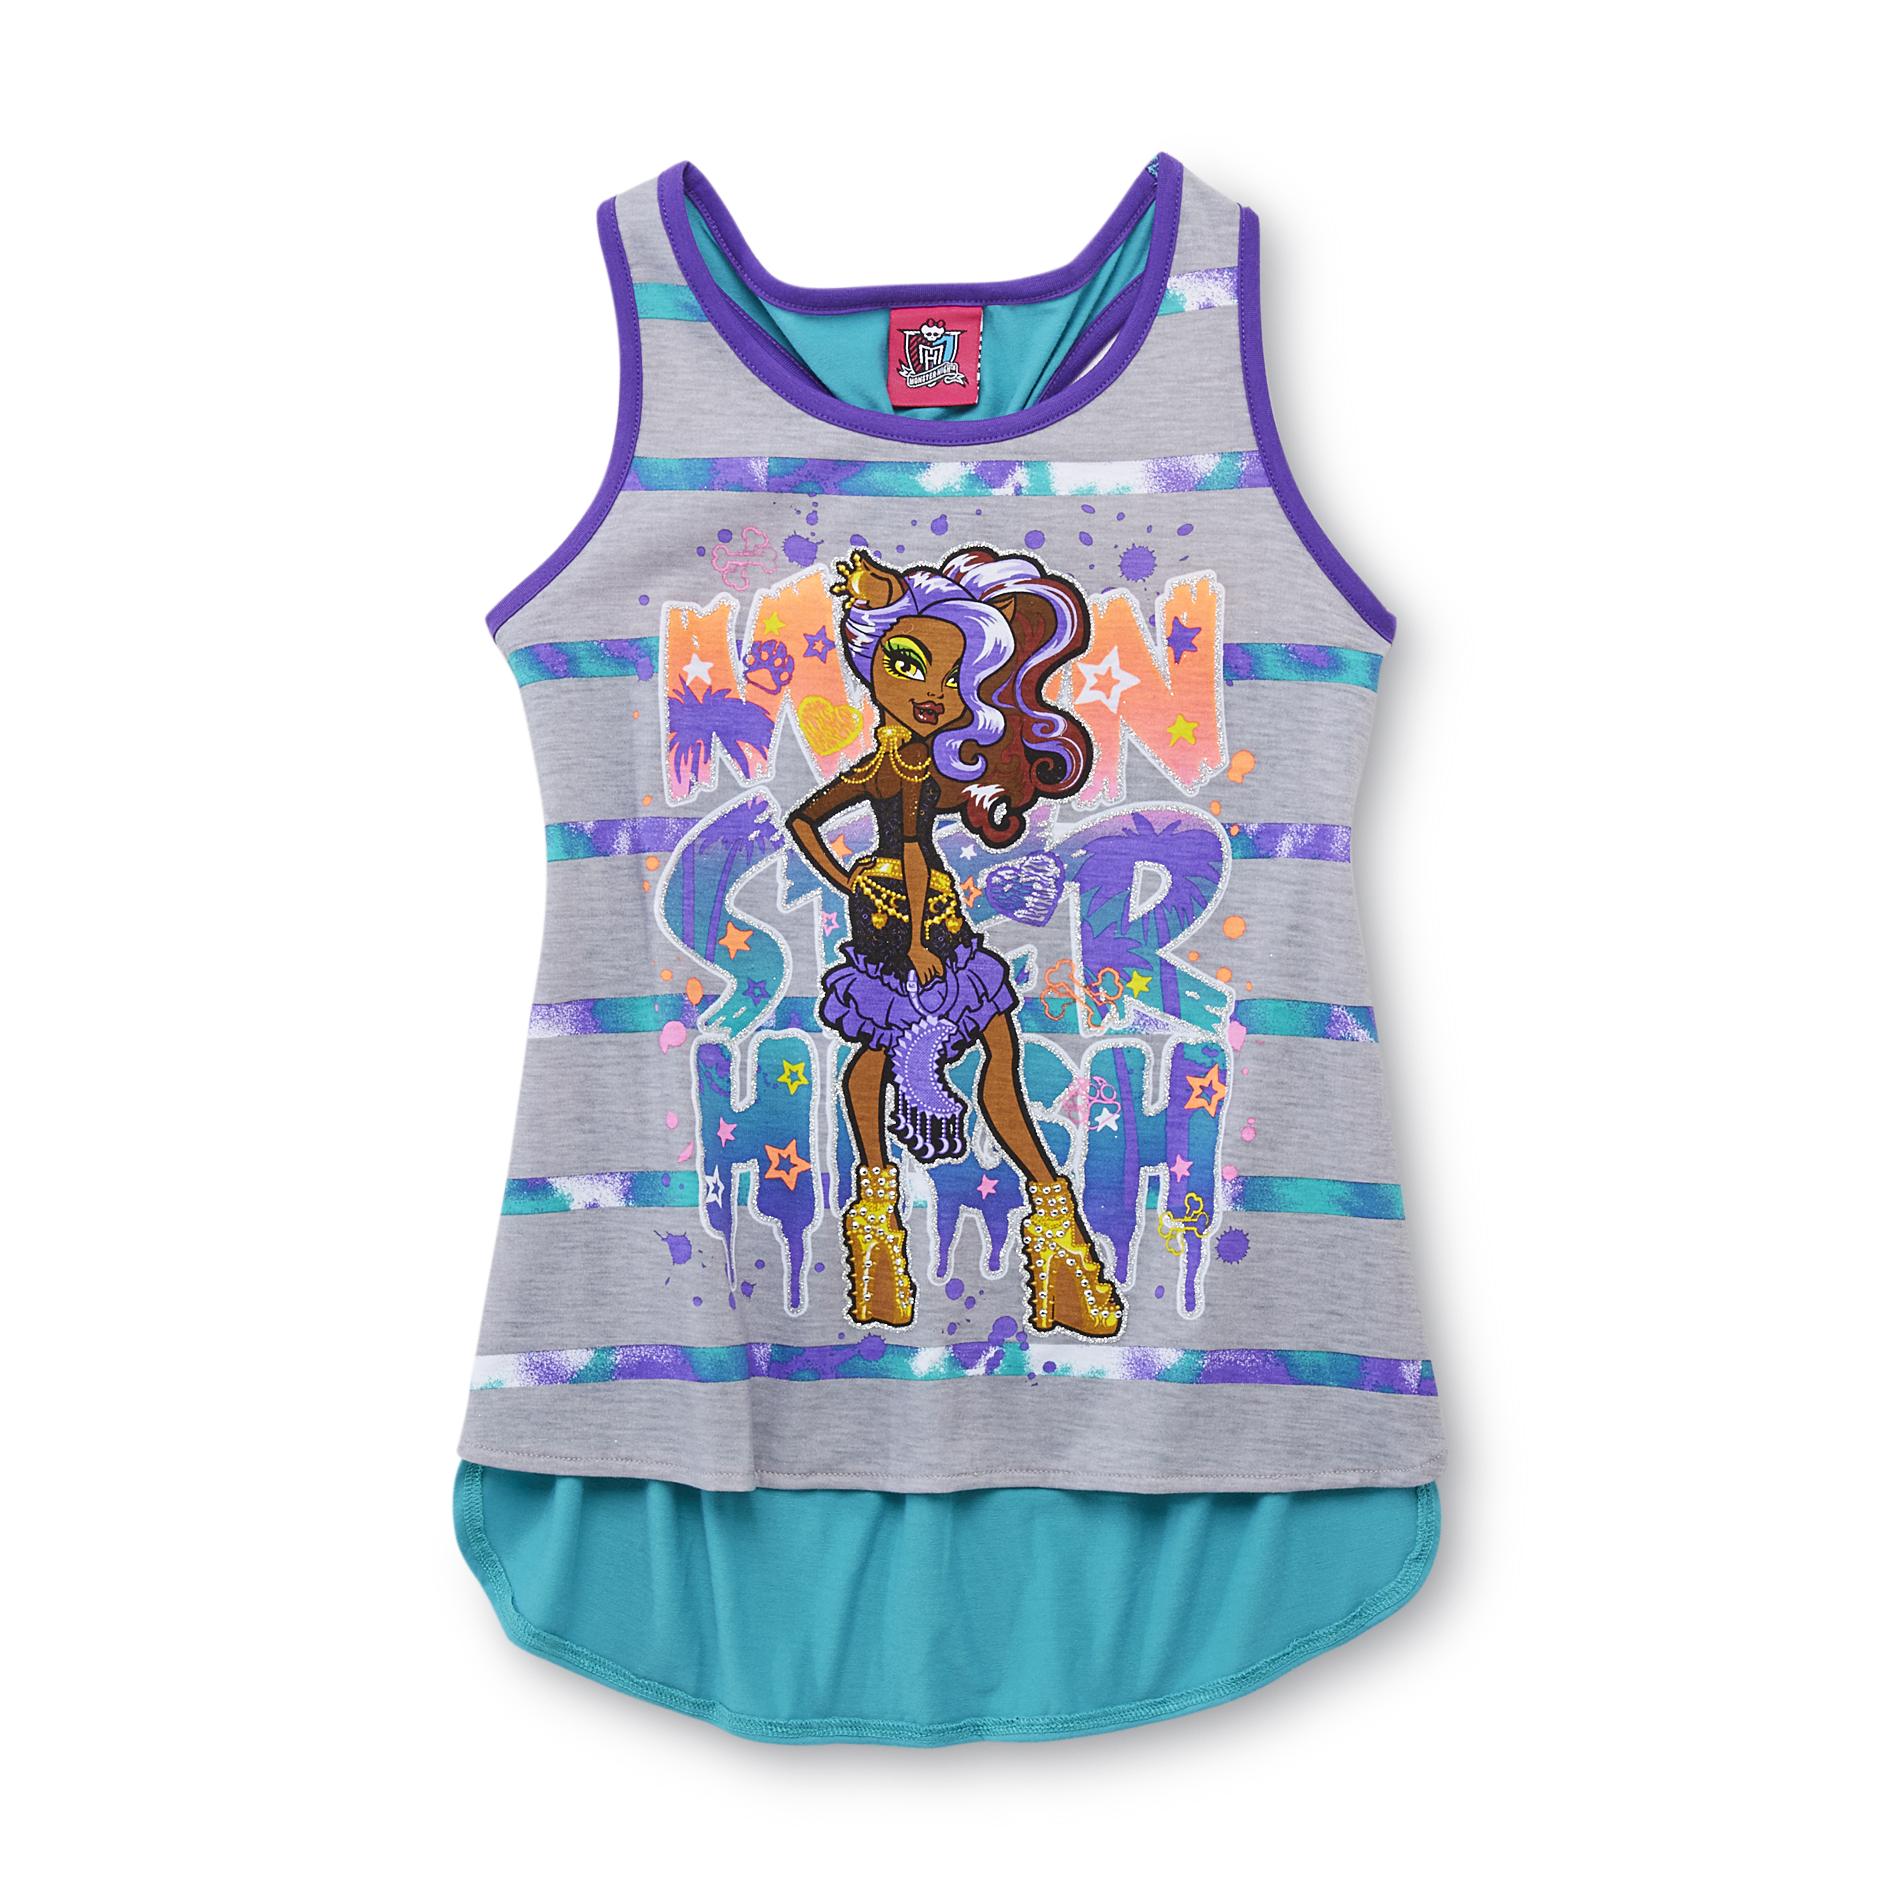 Monster High Girl's Graphic Tank Top - Striped